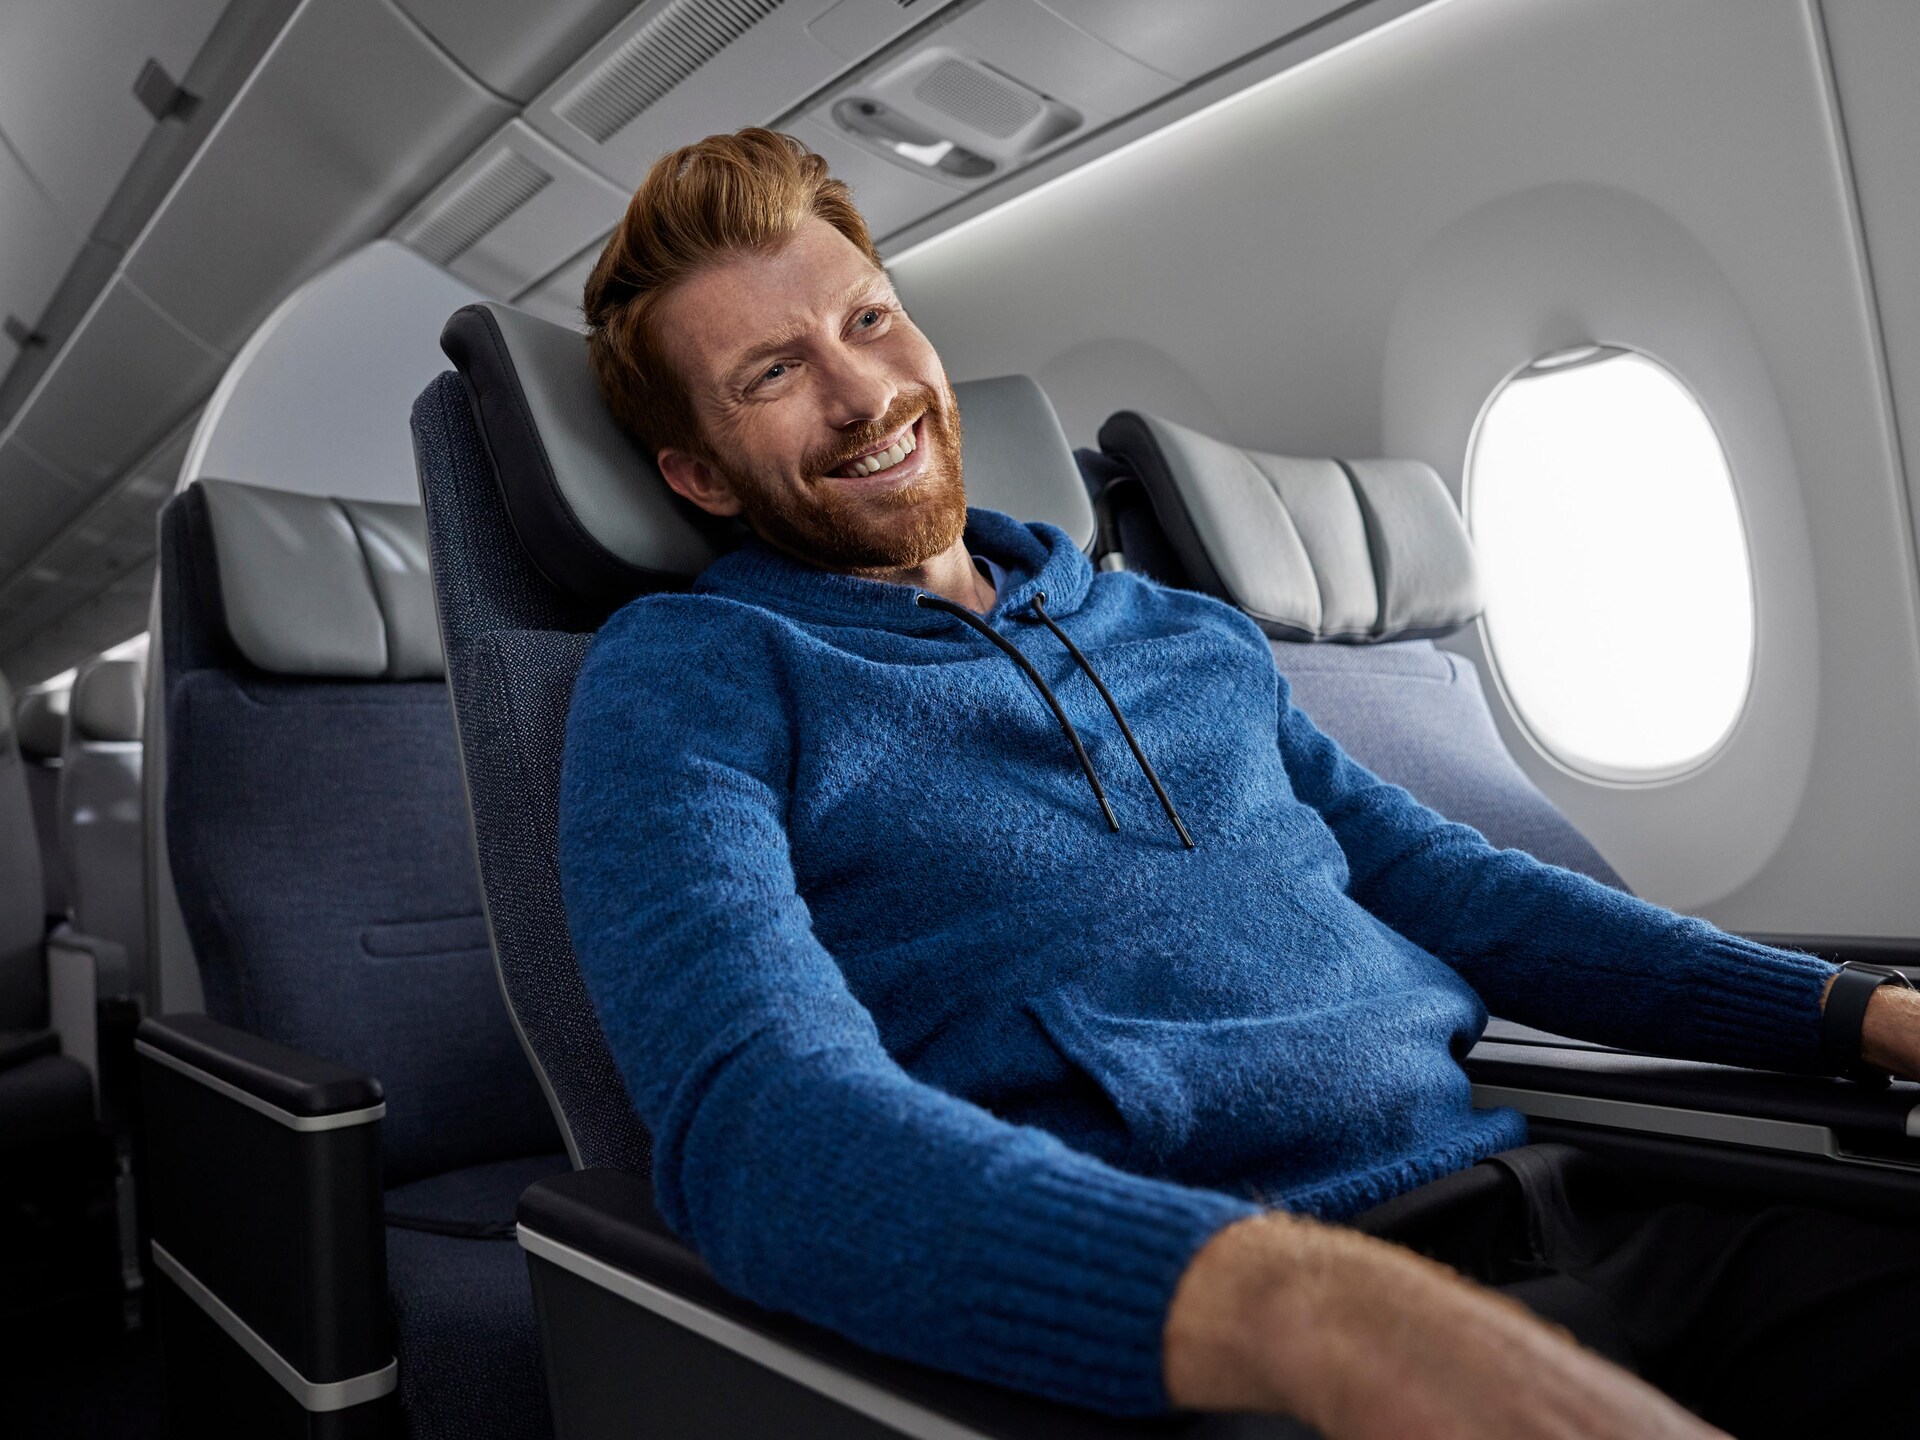 The most popular seat numbers you need to know for long-haul flights